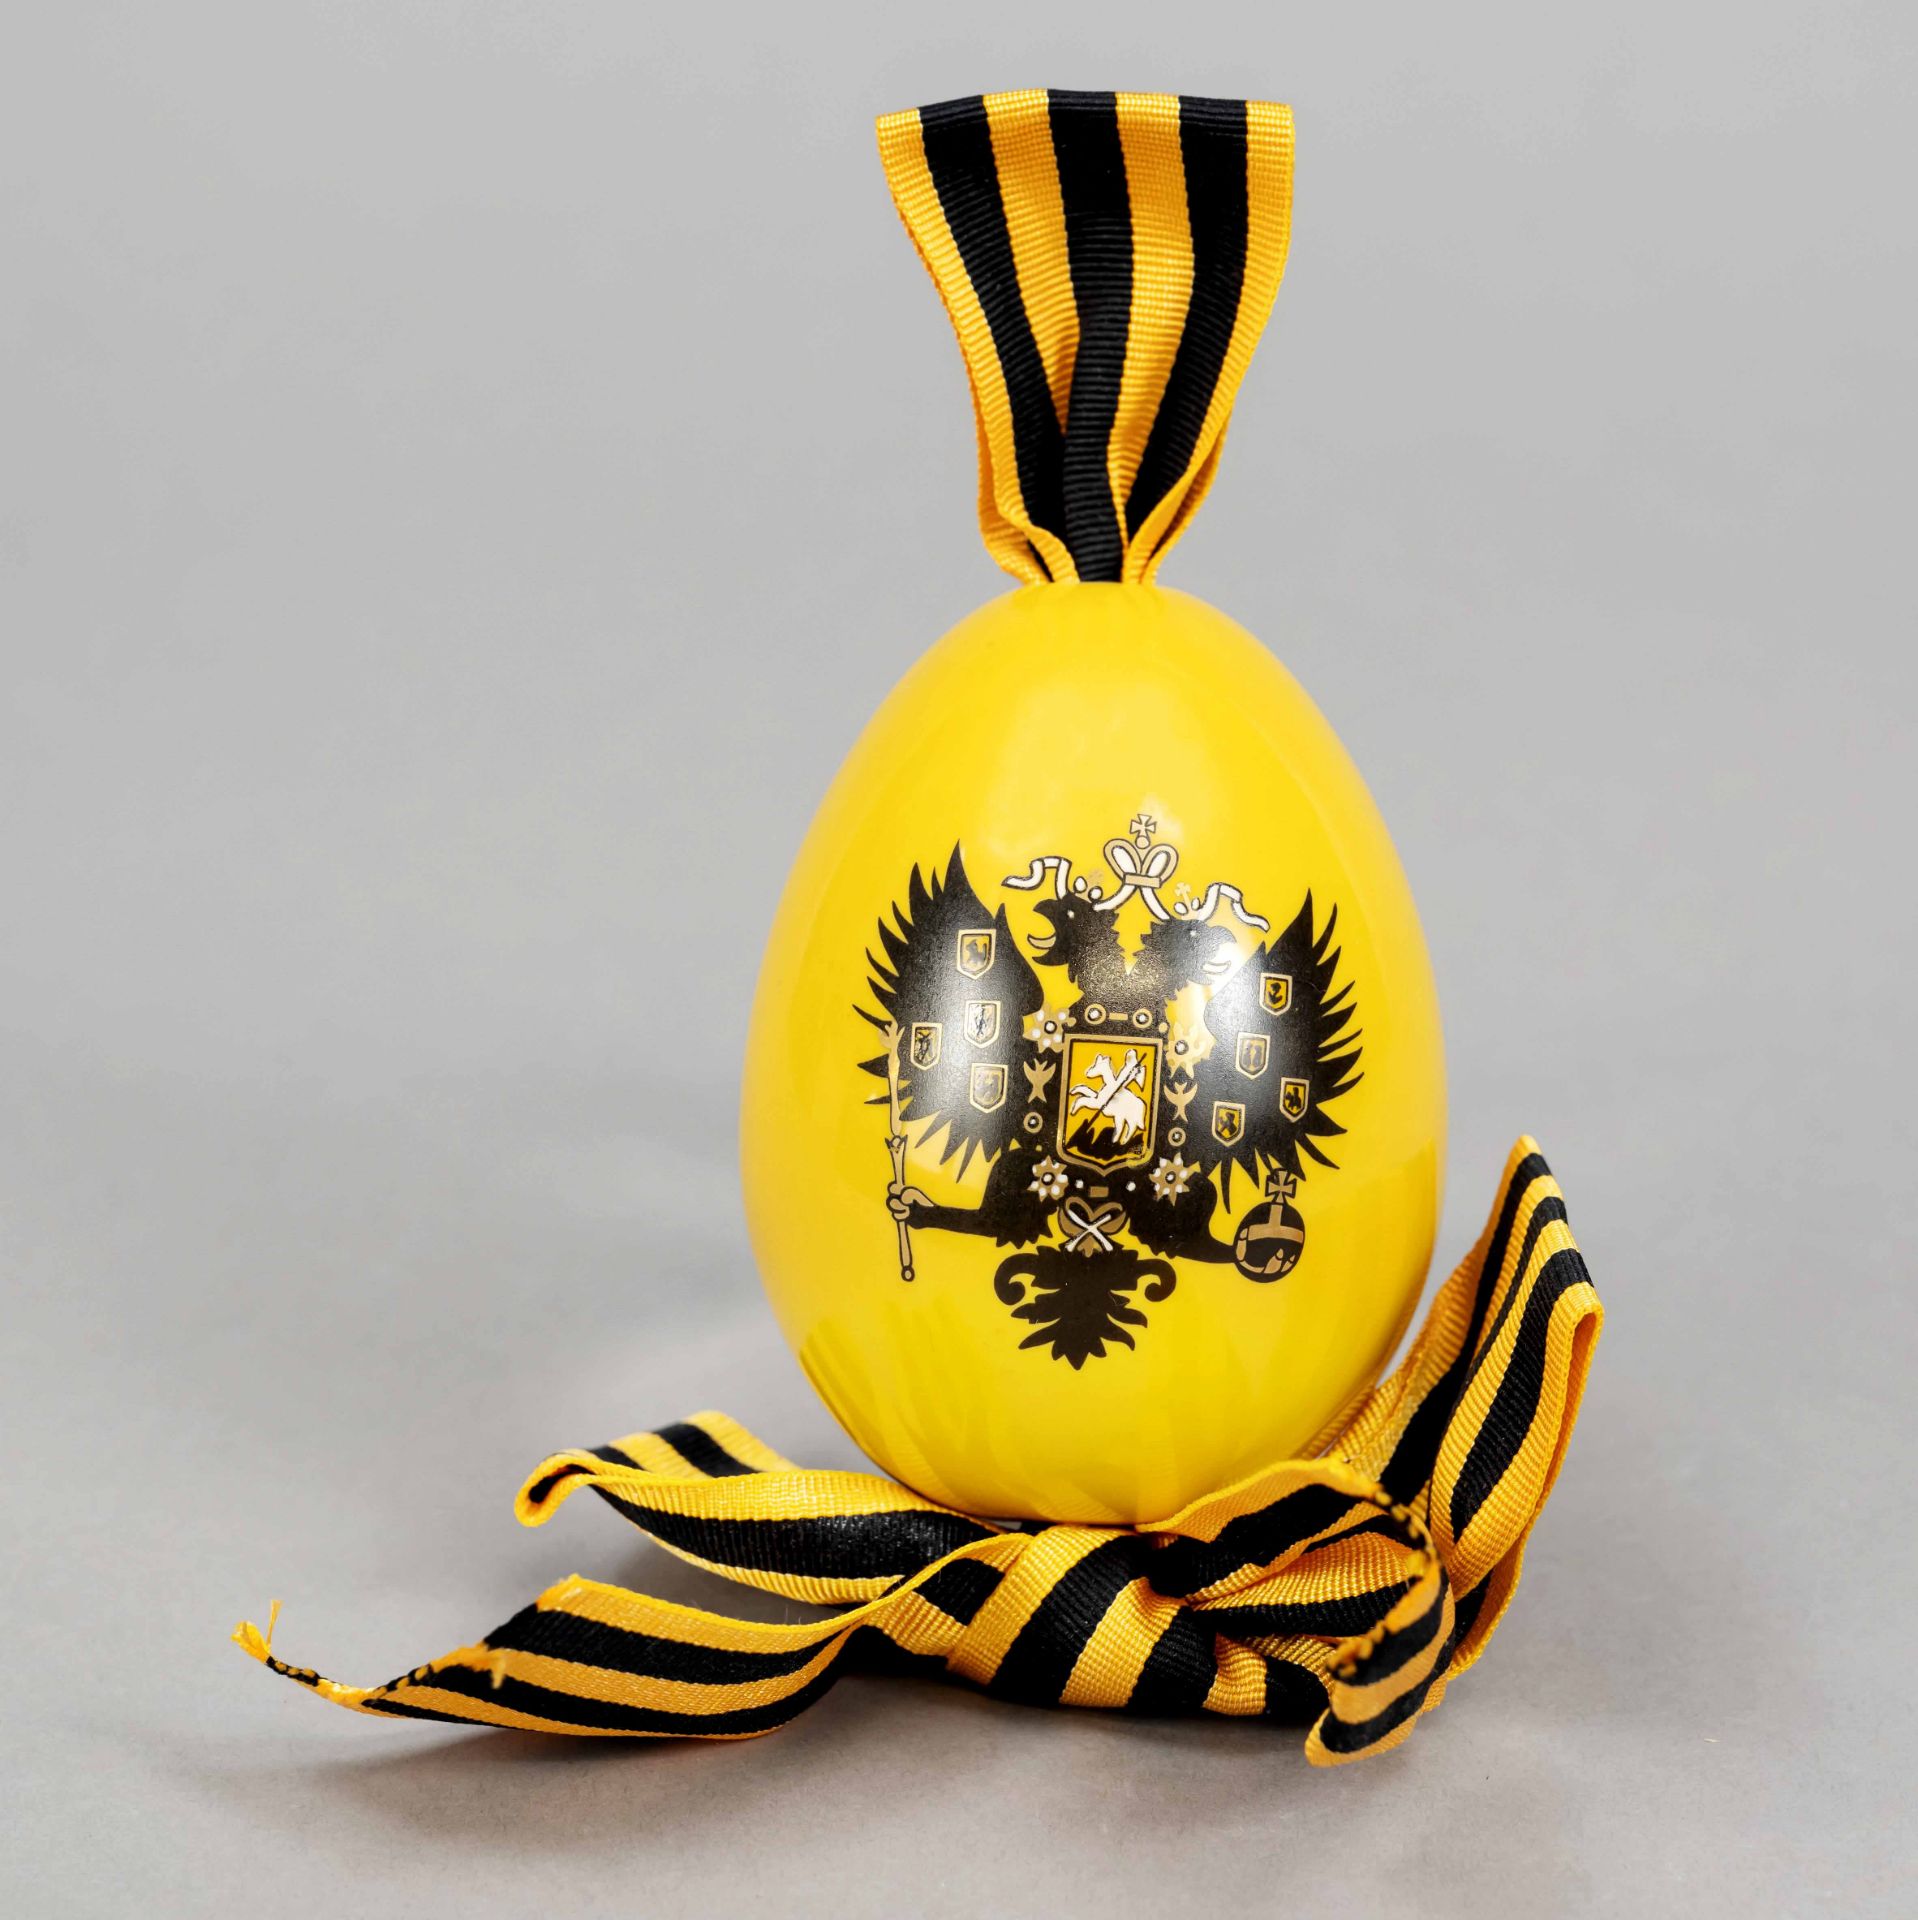 Easter egg, Russia, yellow egg with the coat of arms of the Romanoff family, on the verso monogram